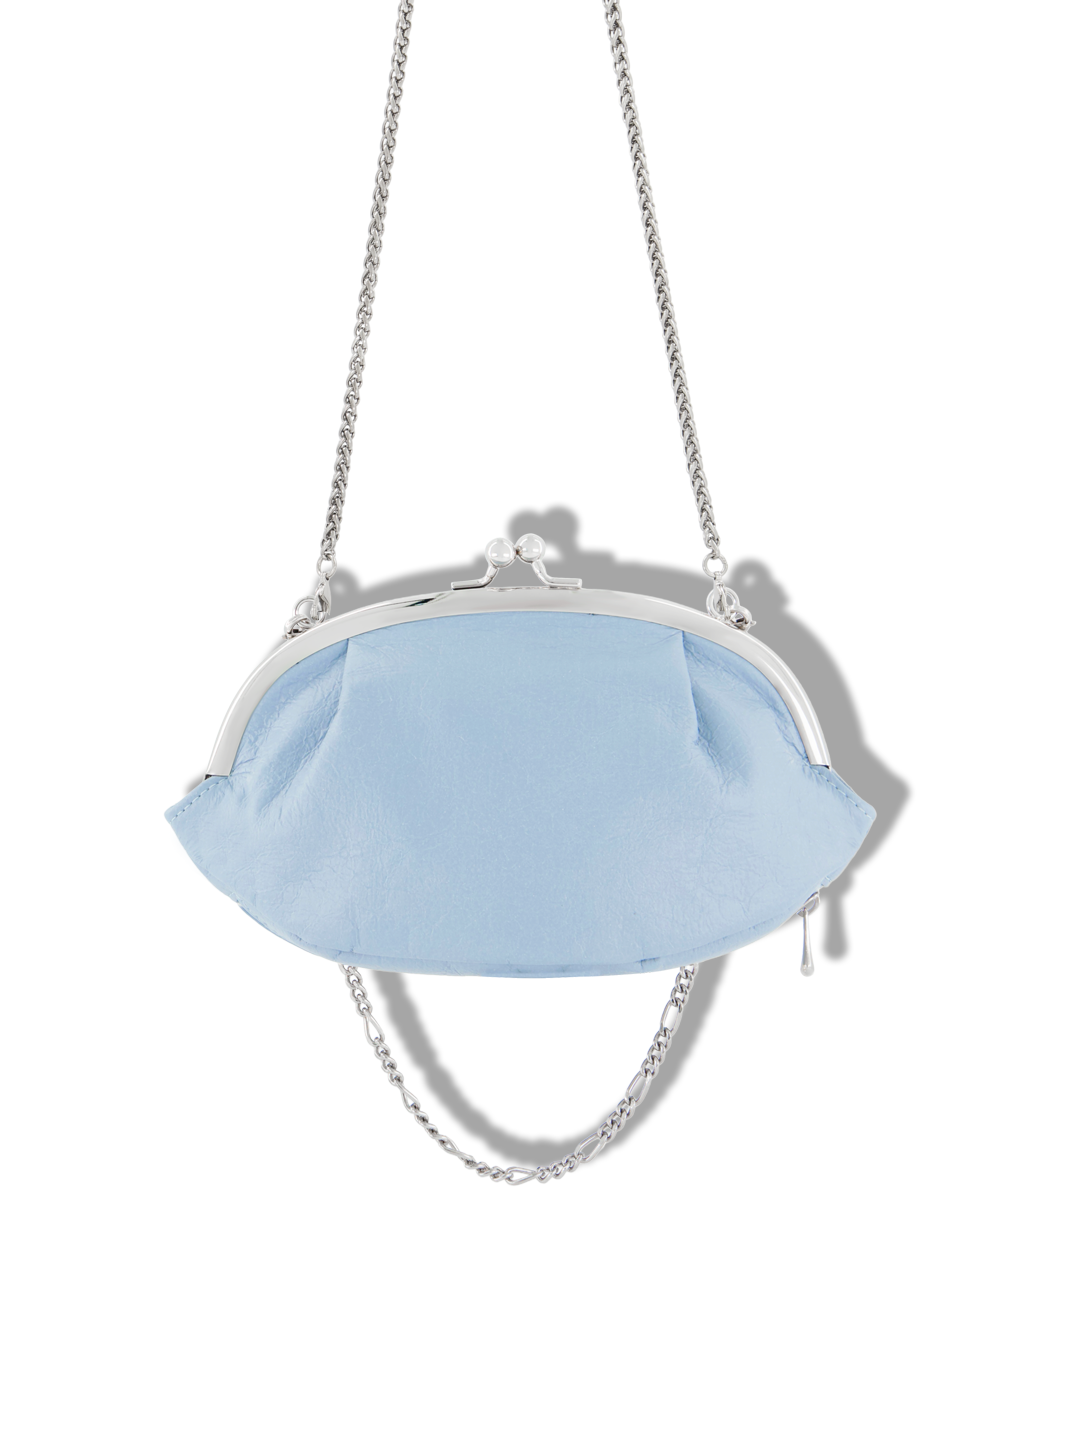 Cling Bag (Butterfly Blue)